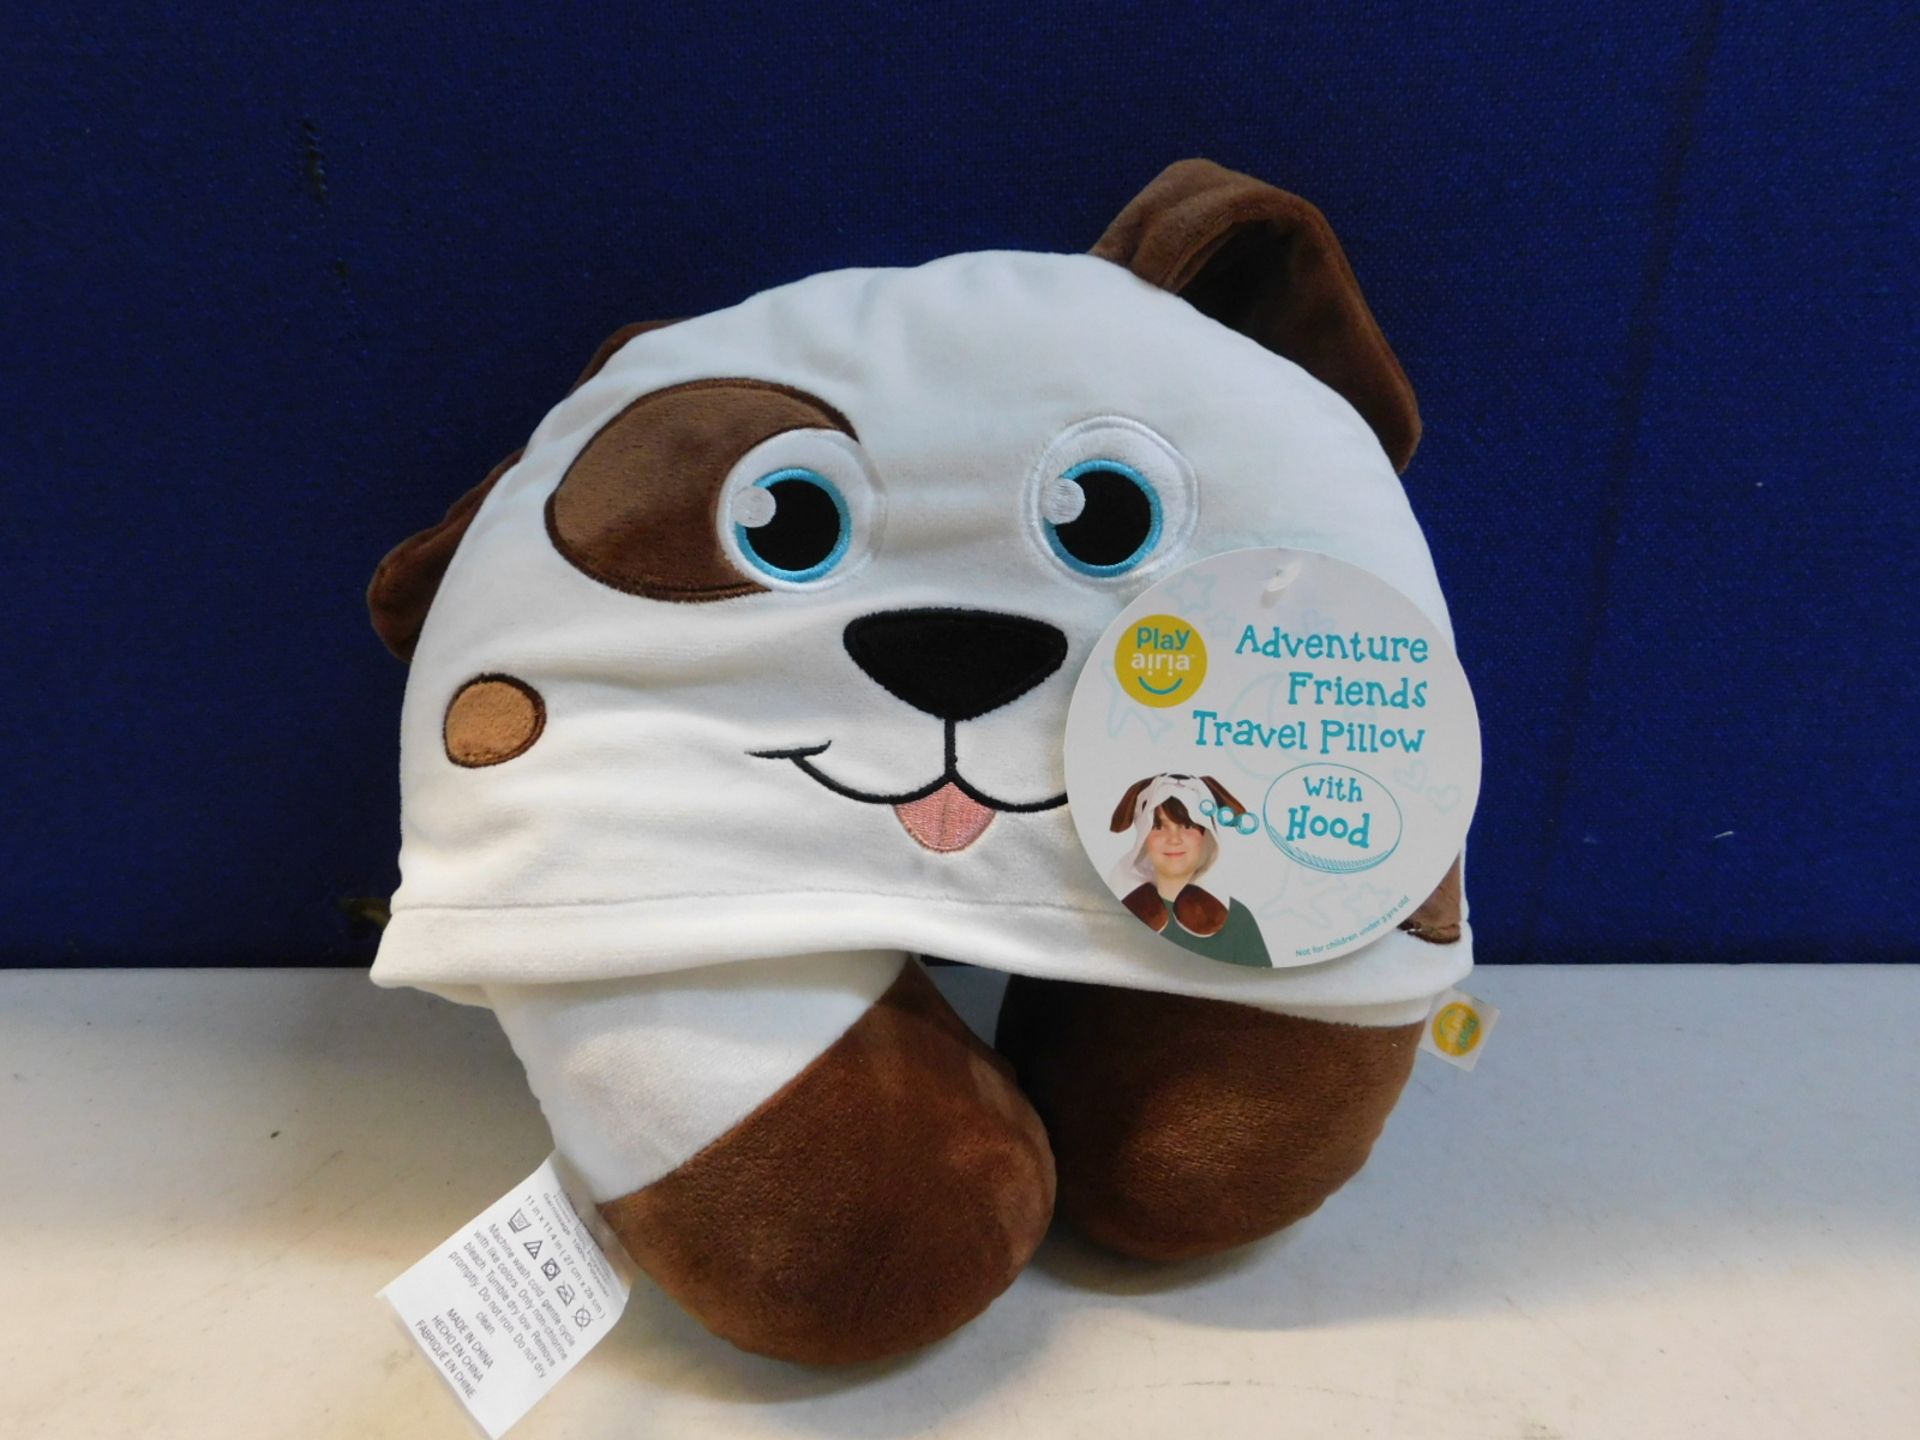 1 BRAND NEW PLAYAIRIA ADVENTURE FRIENDS PUPPY TRAVEL PILLOW WITH HOOD RRP £19.99